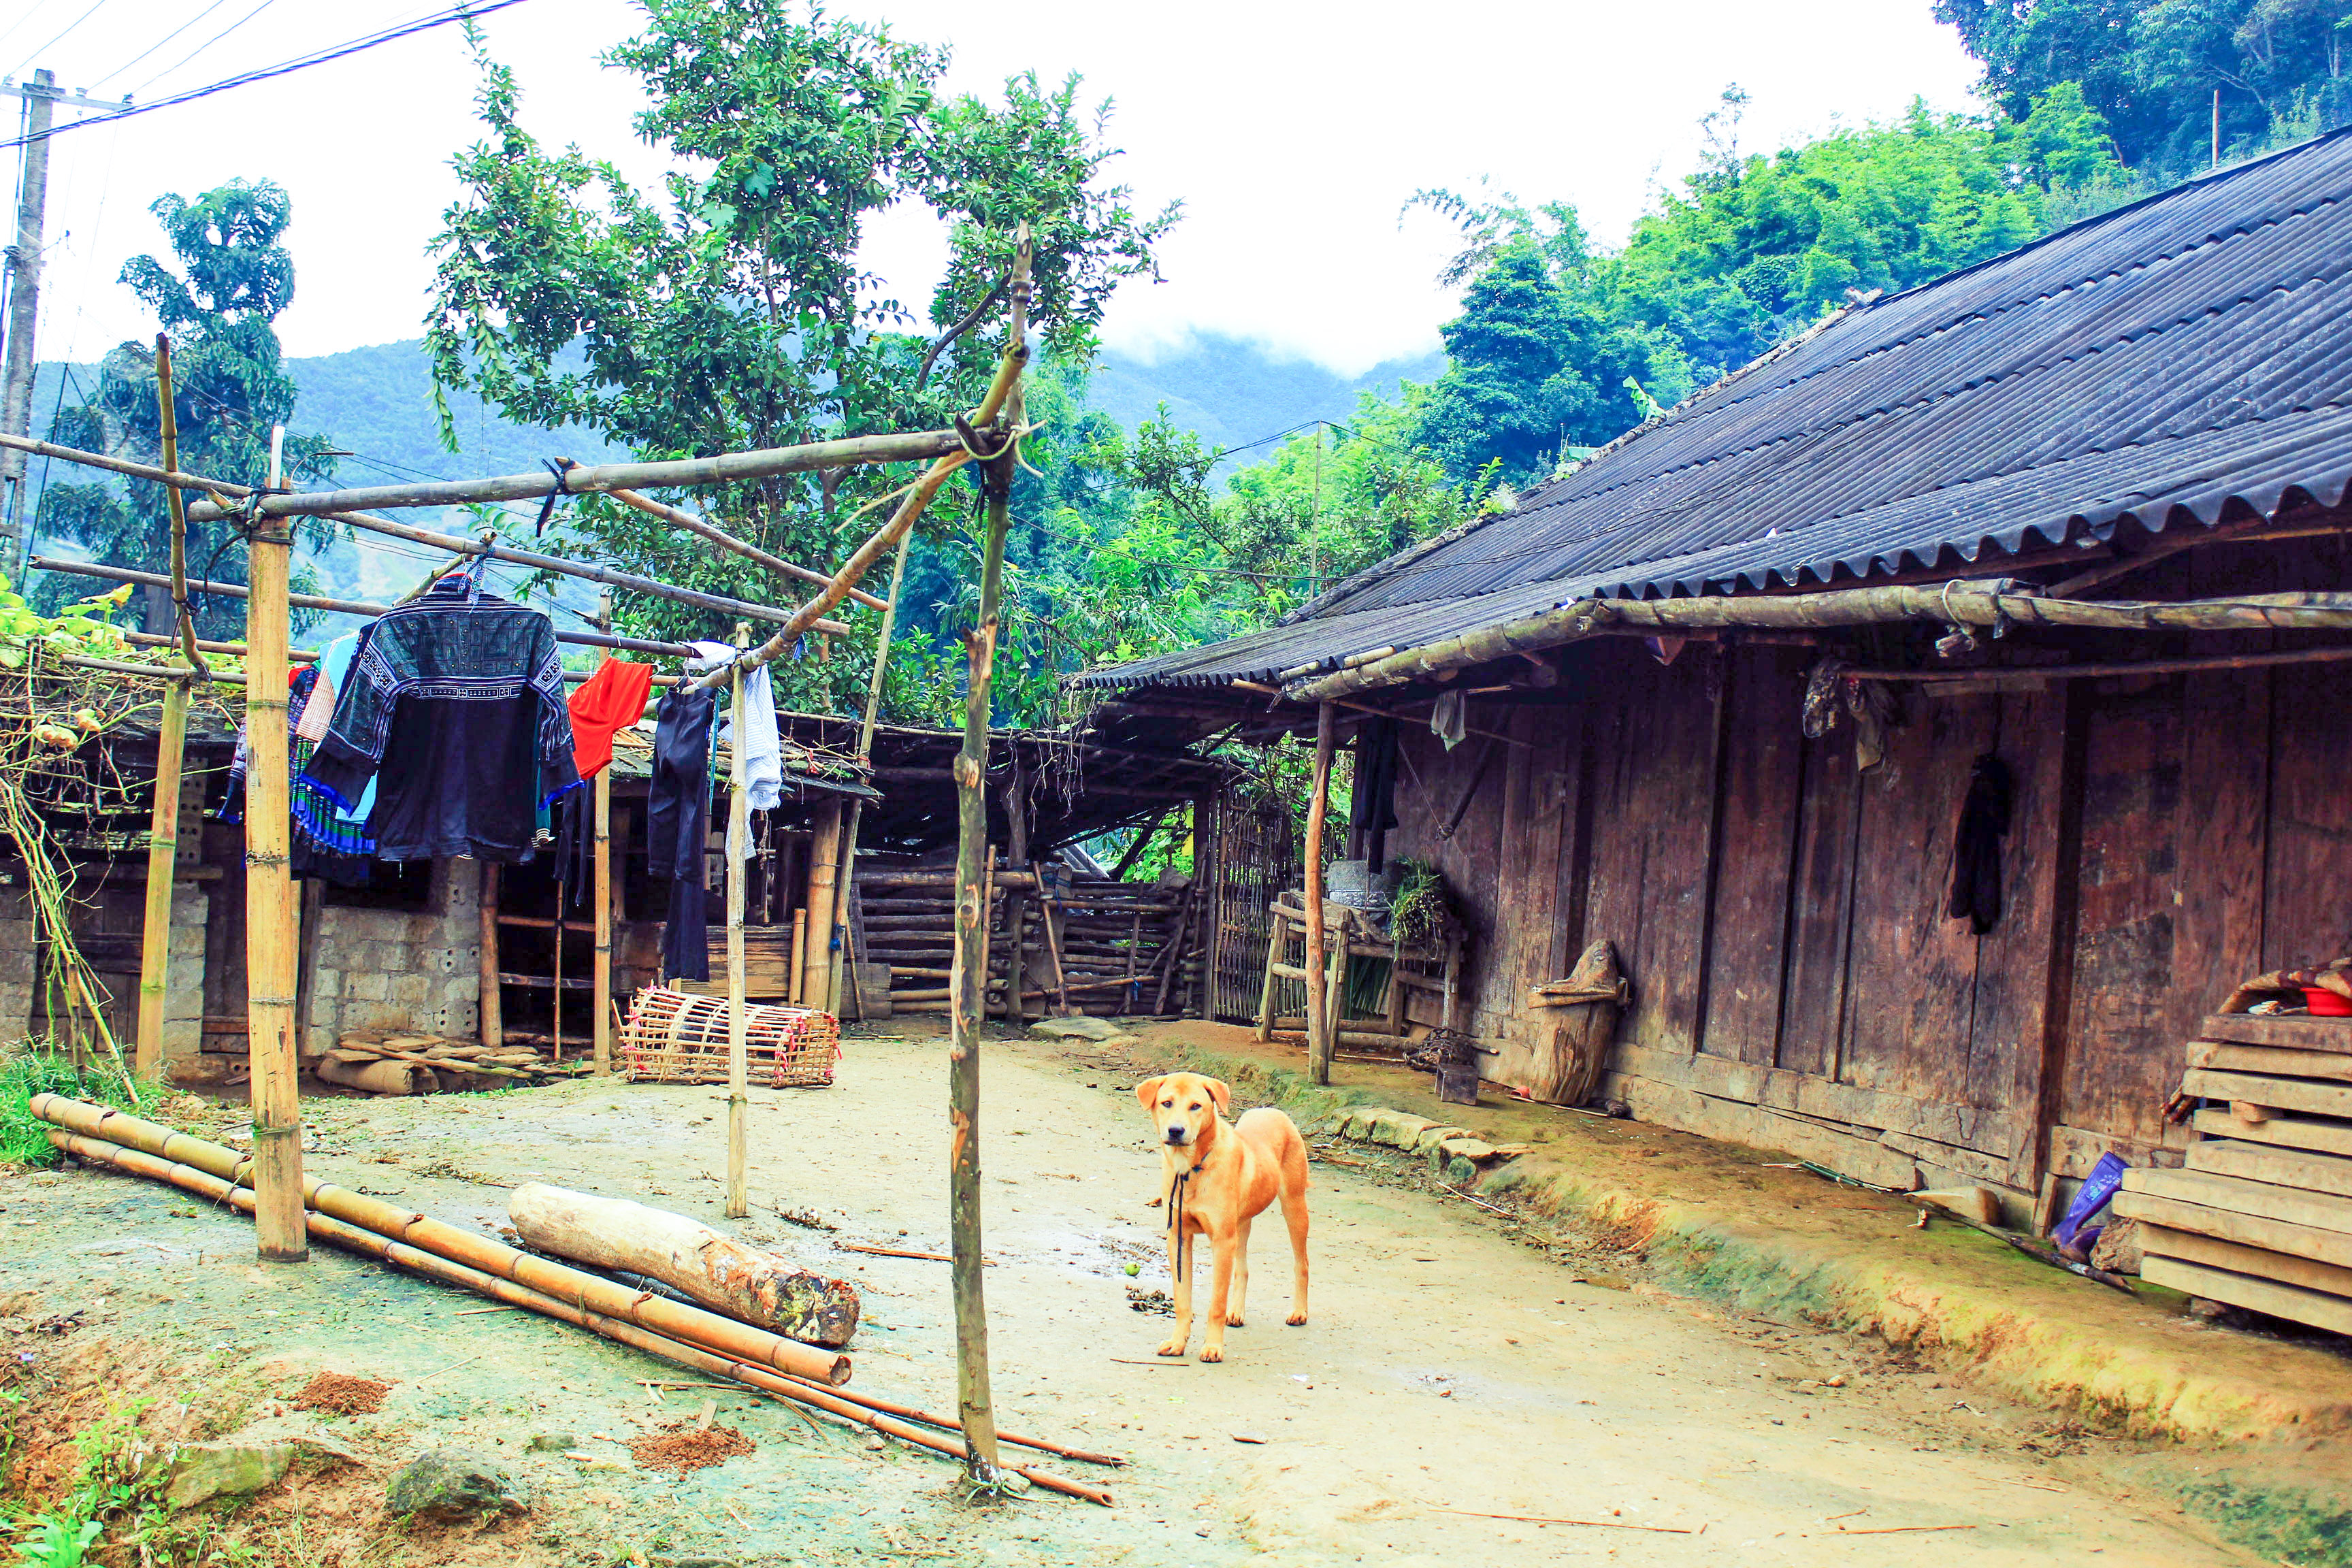 House of a local Hmong family